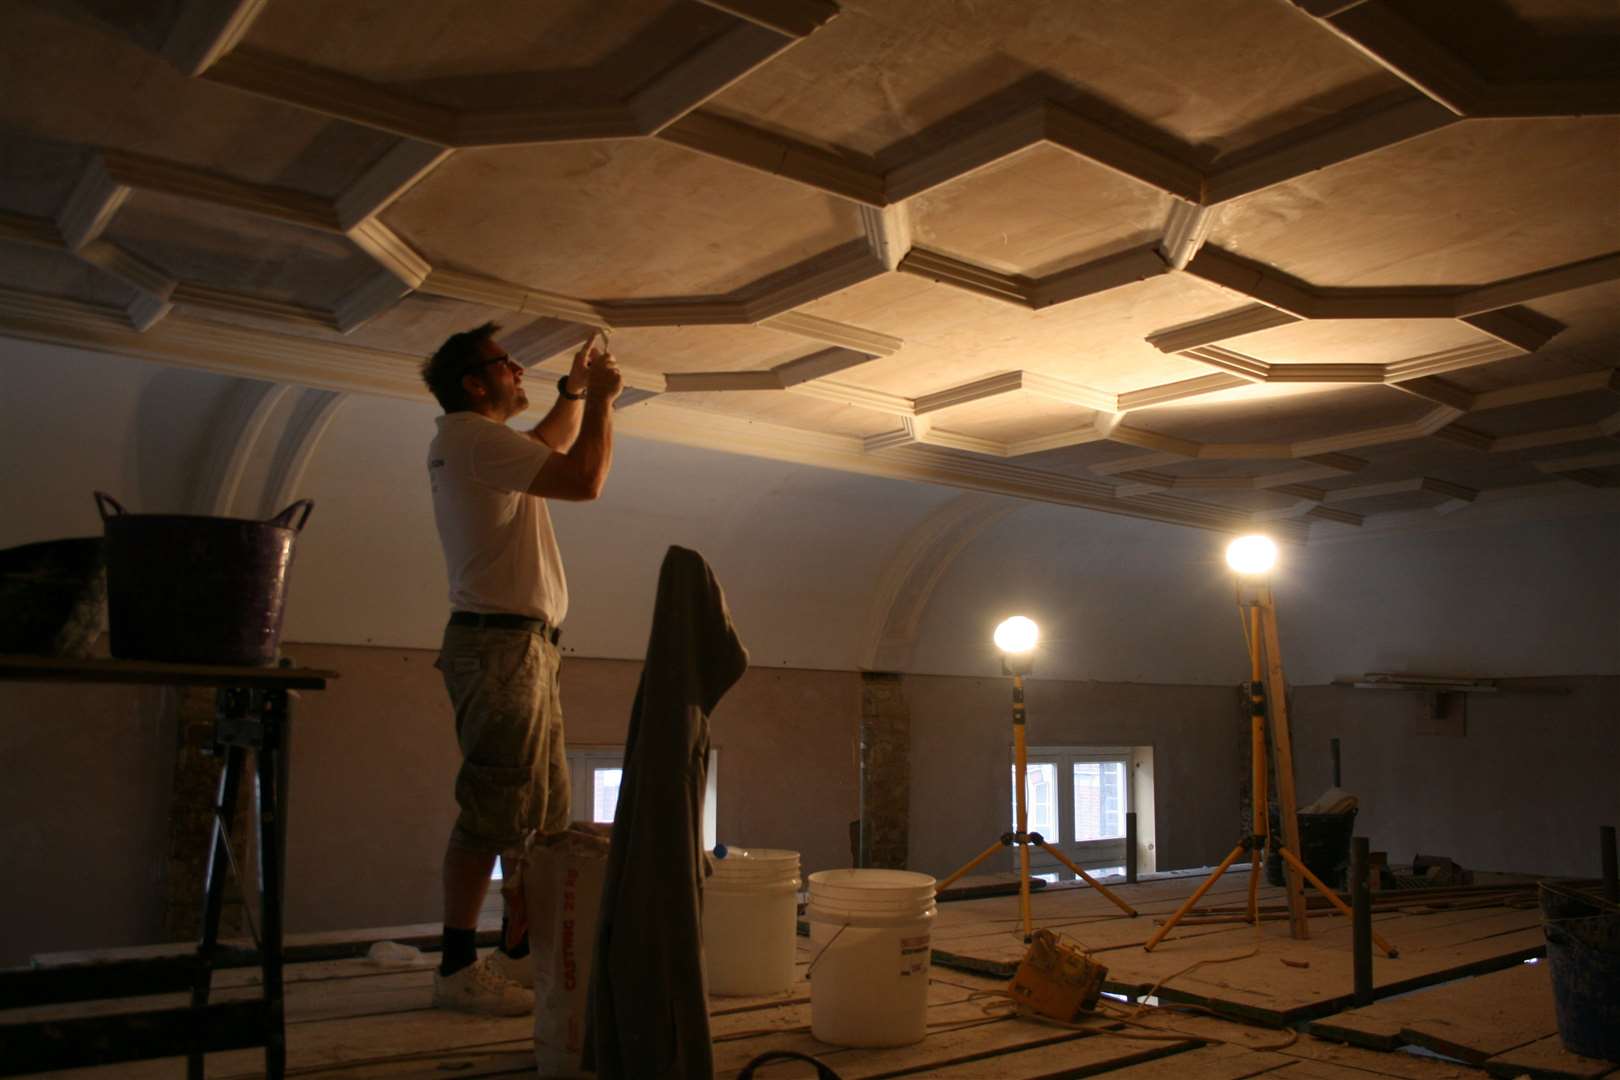 Work continues apace at the old Theatre Royal and bank buildings in Chatham High Street, which lay empty for years but won planning permission in 2013 to change to bars, cafes, restaurants and flats. Gary Neve fixes the ceiling in the old Circle bar